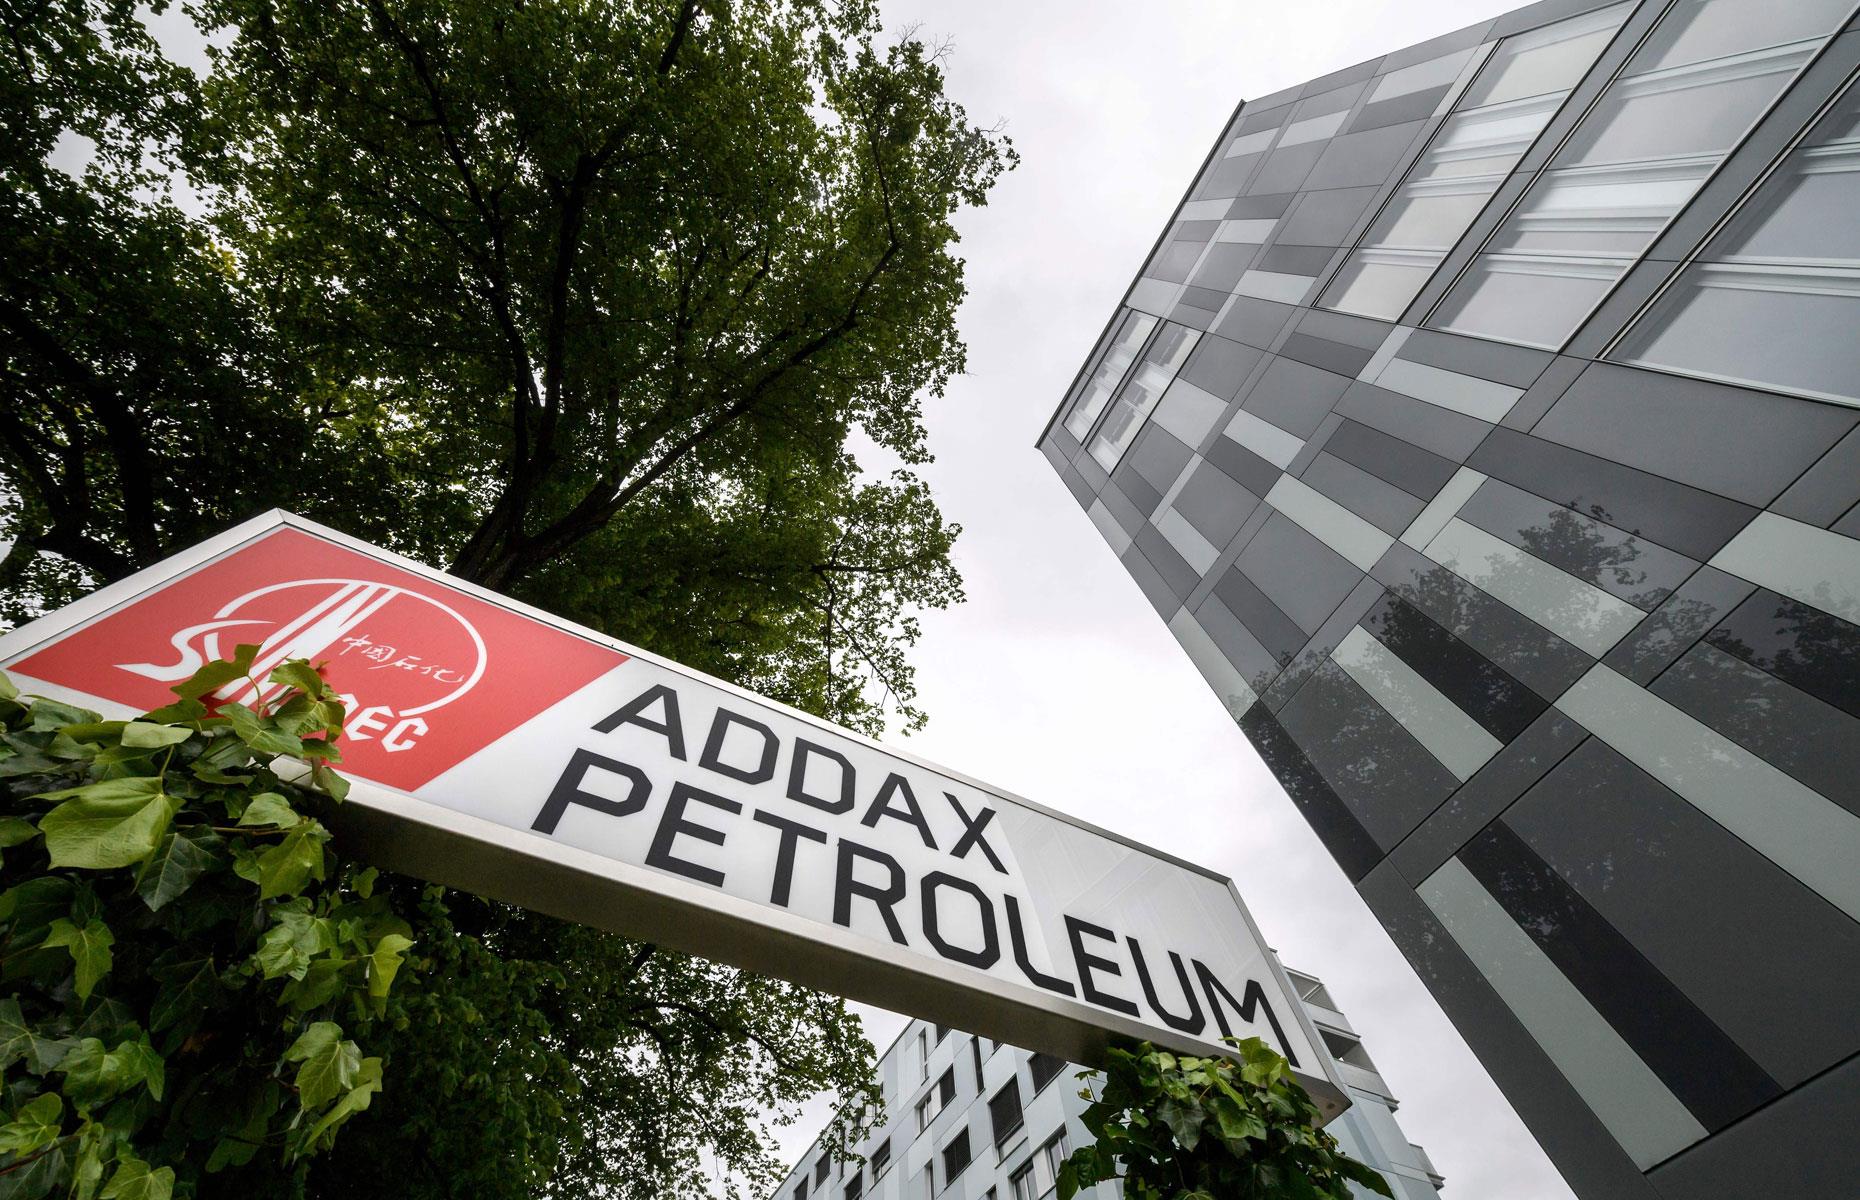 Sinopec also bought Swiss-owned oil company Addax Petroleum: $7.2 billion (£5.8bn)